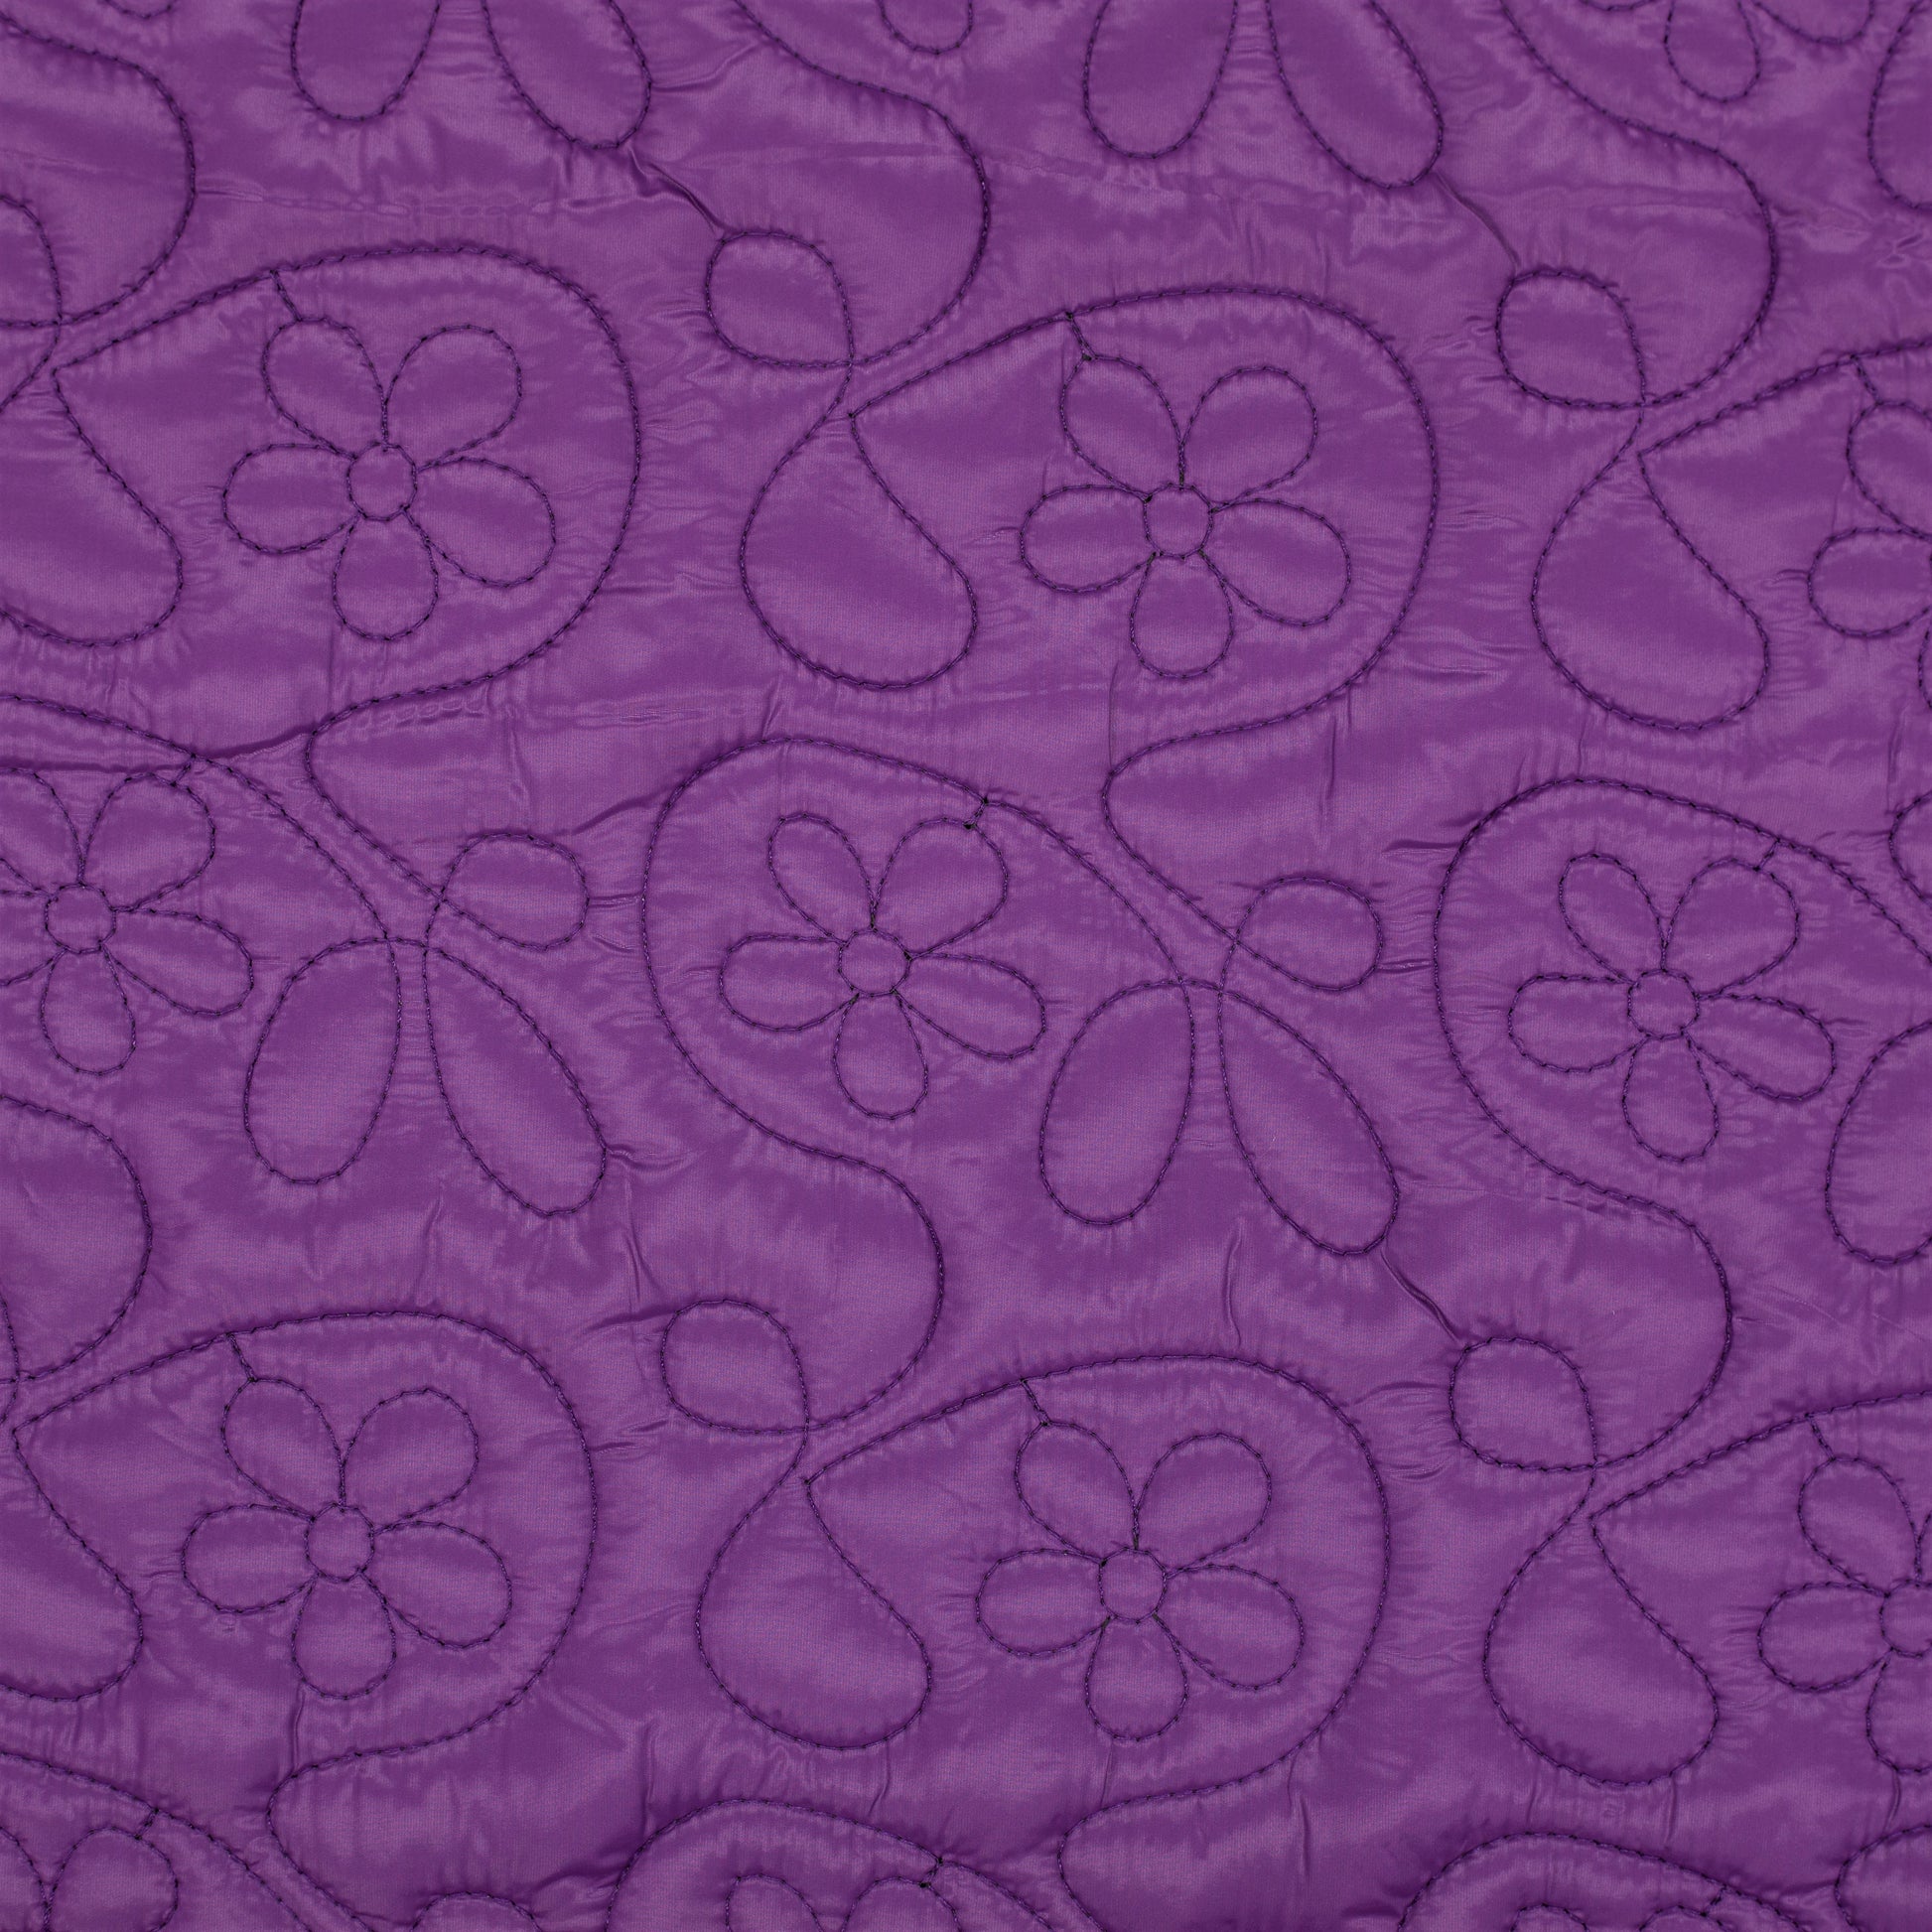 Embroidered Quilt Flowers, Purple - pattern